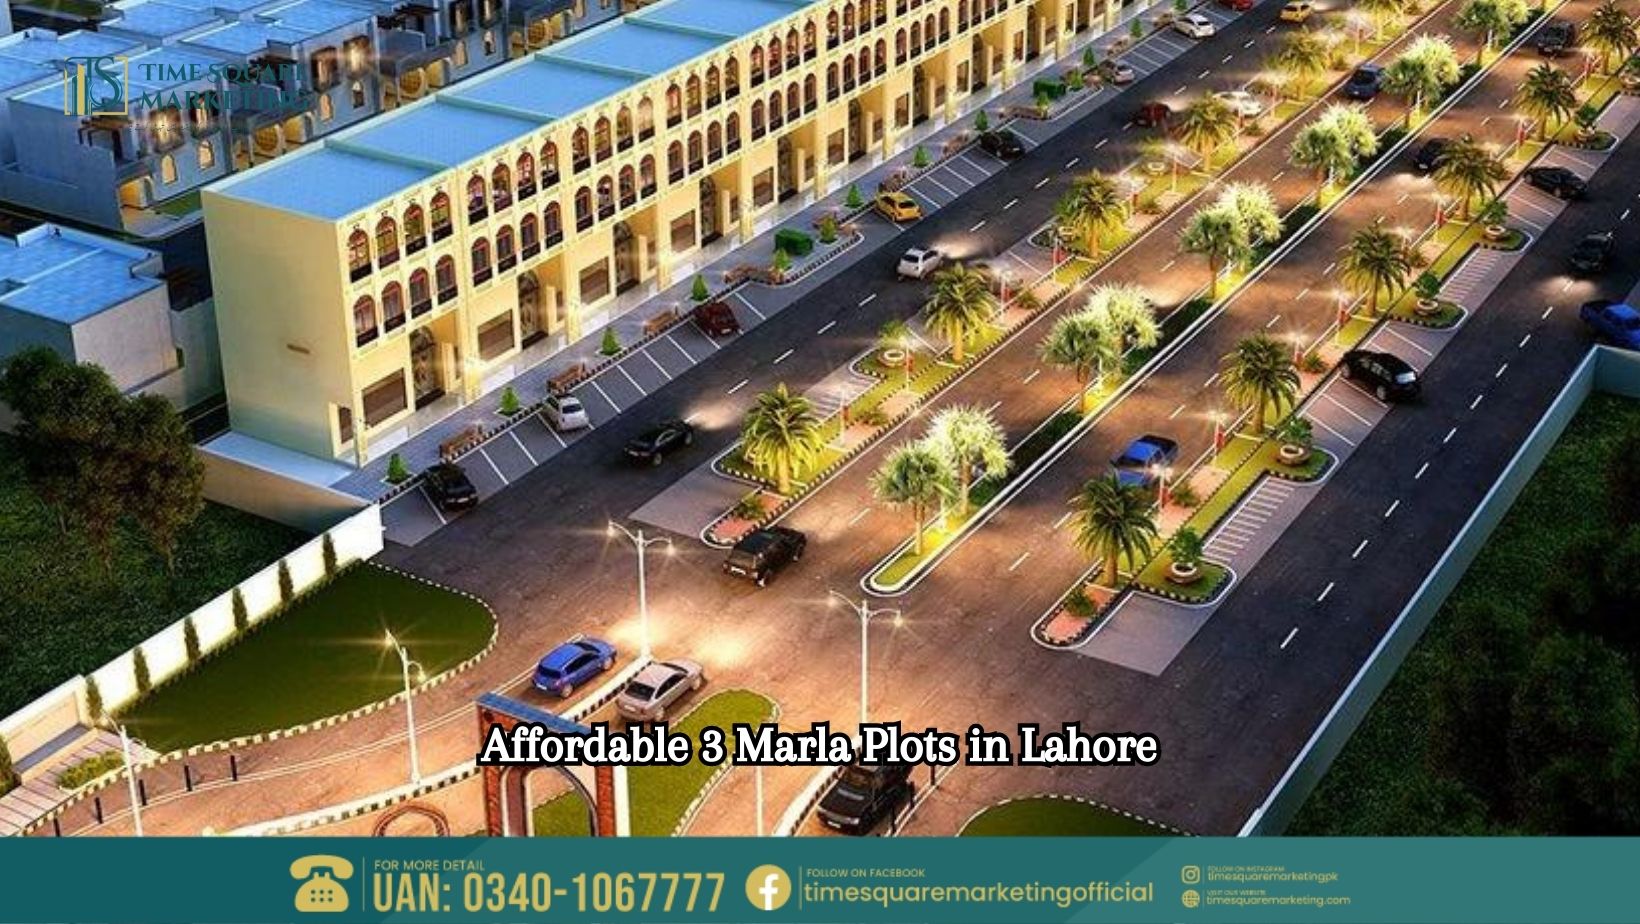 Affordable 3 Marla Plots in Lahore